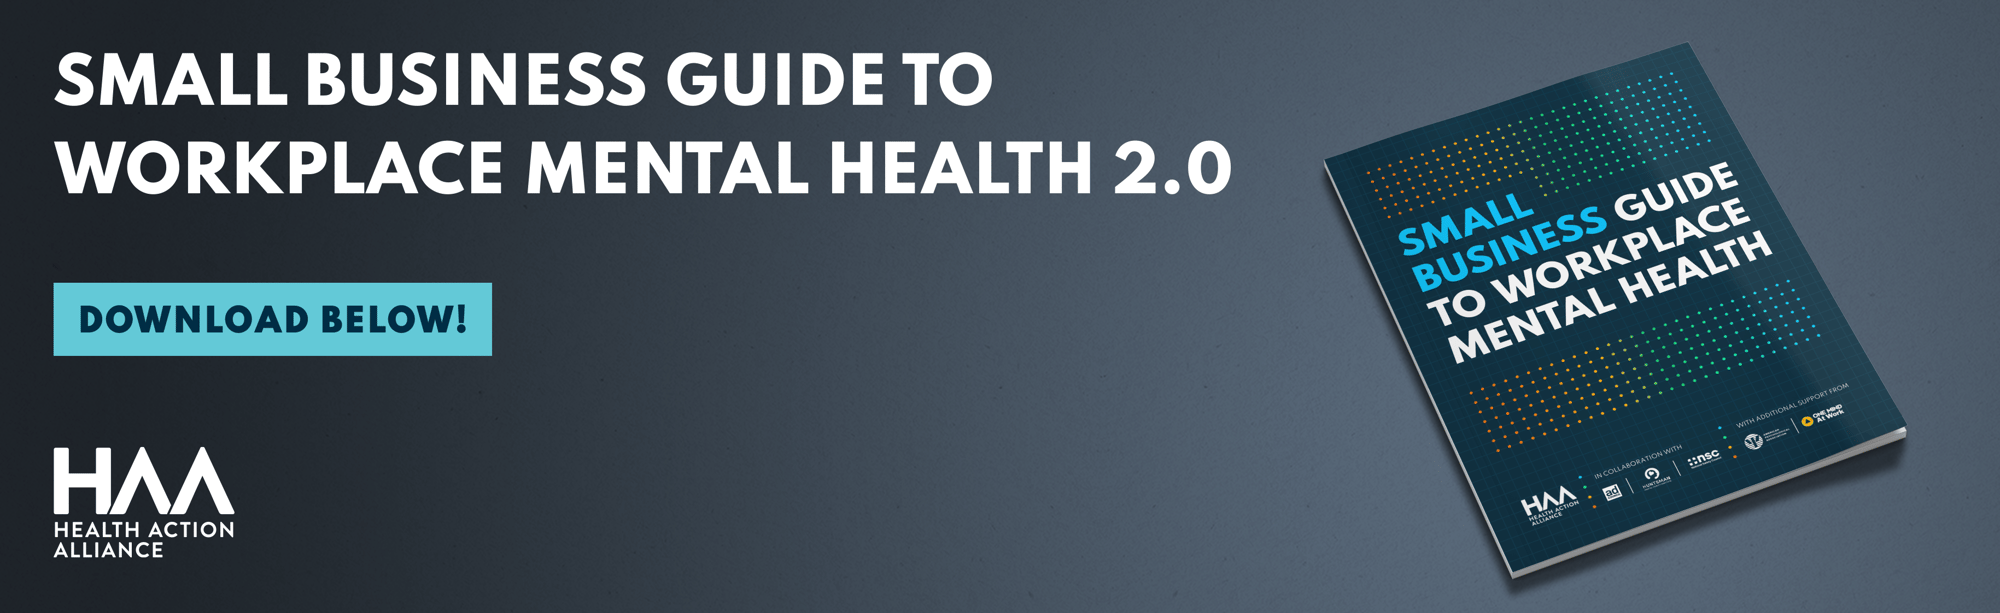 Small Business Guide to Workplace Mental Health 2.0 Banner